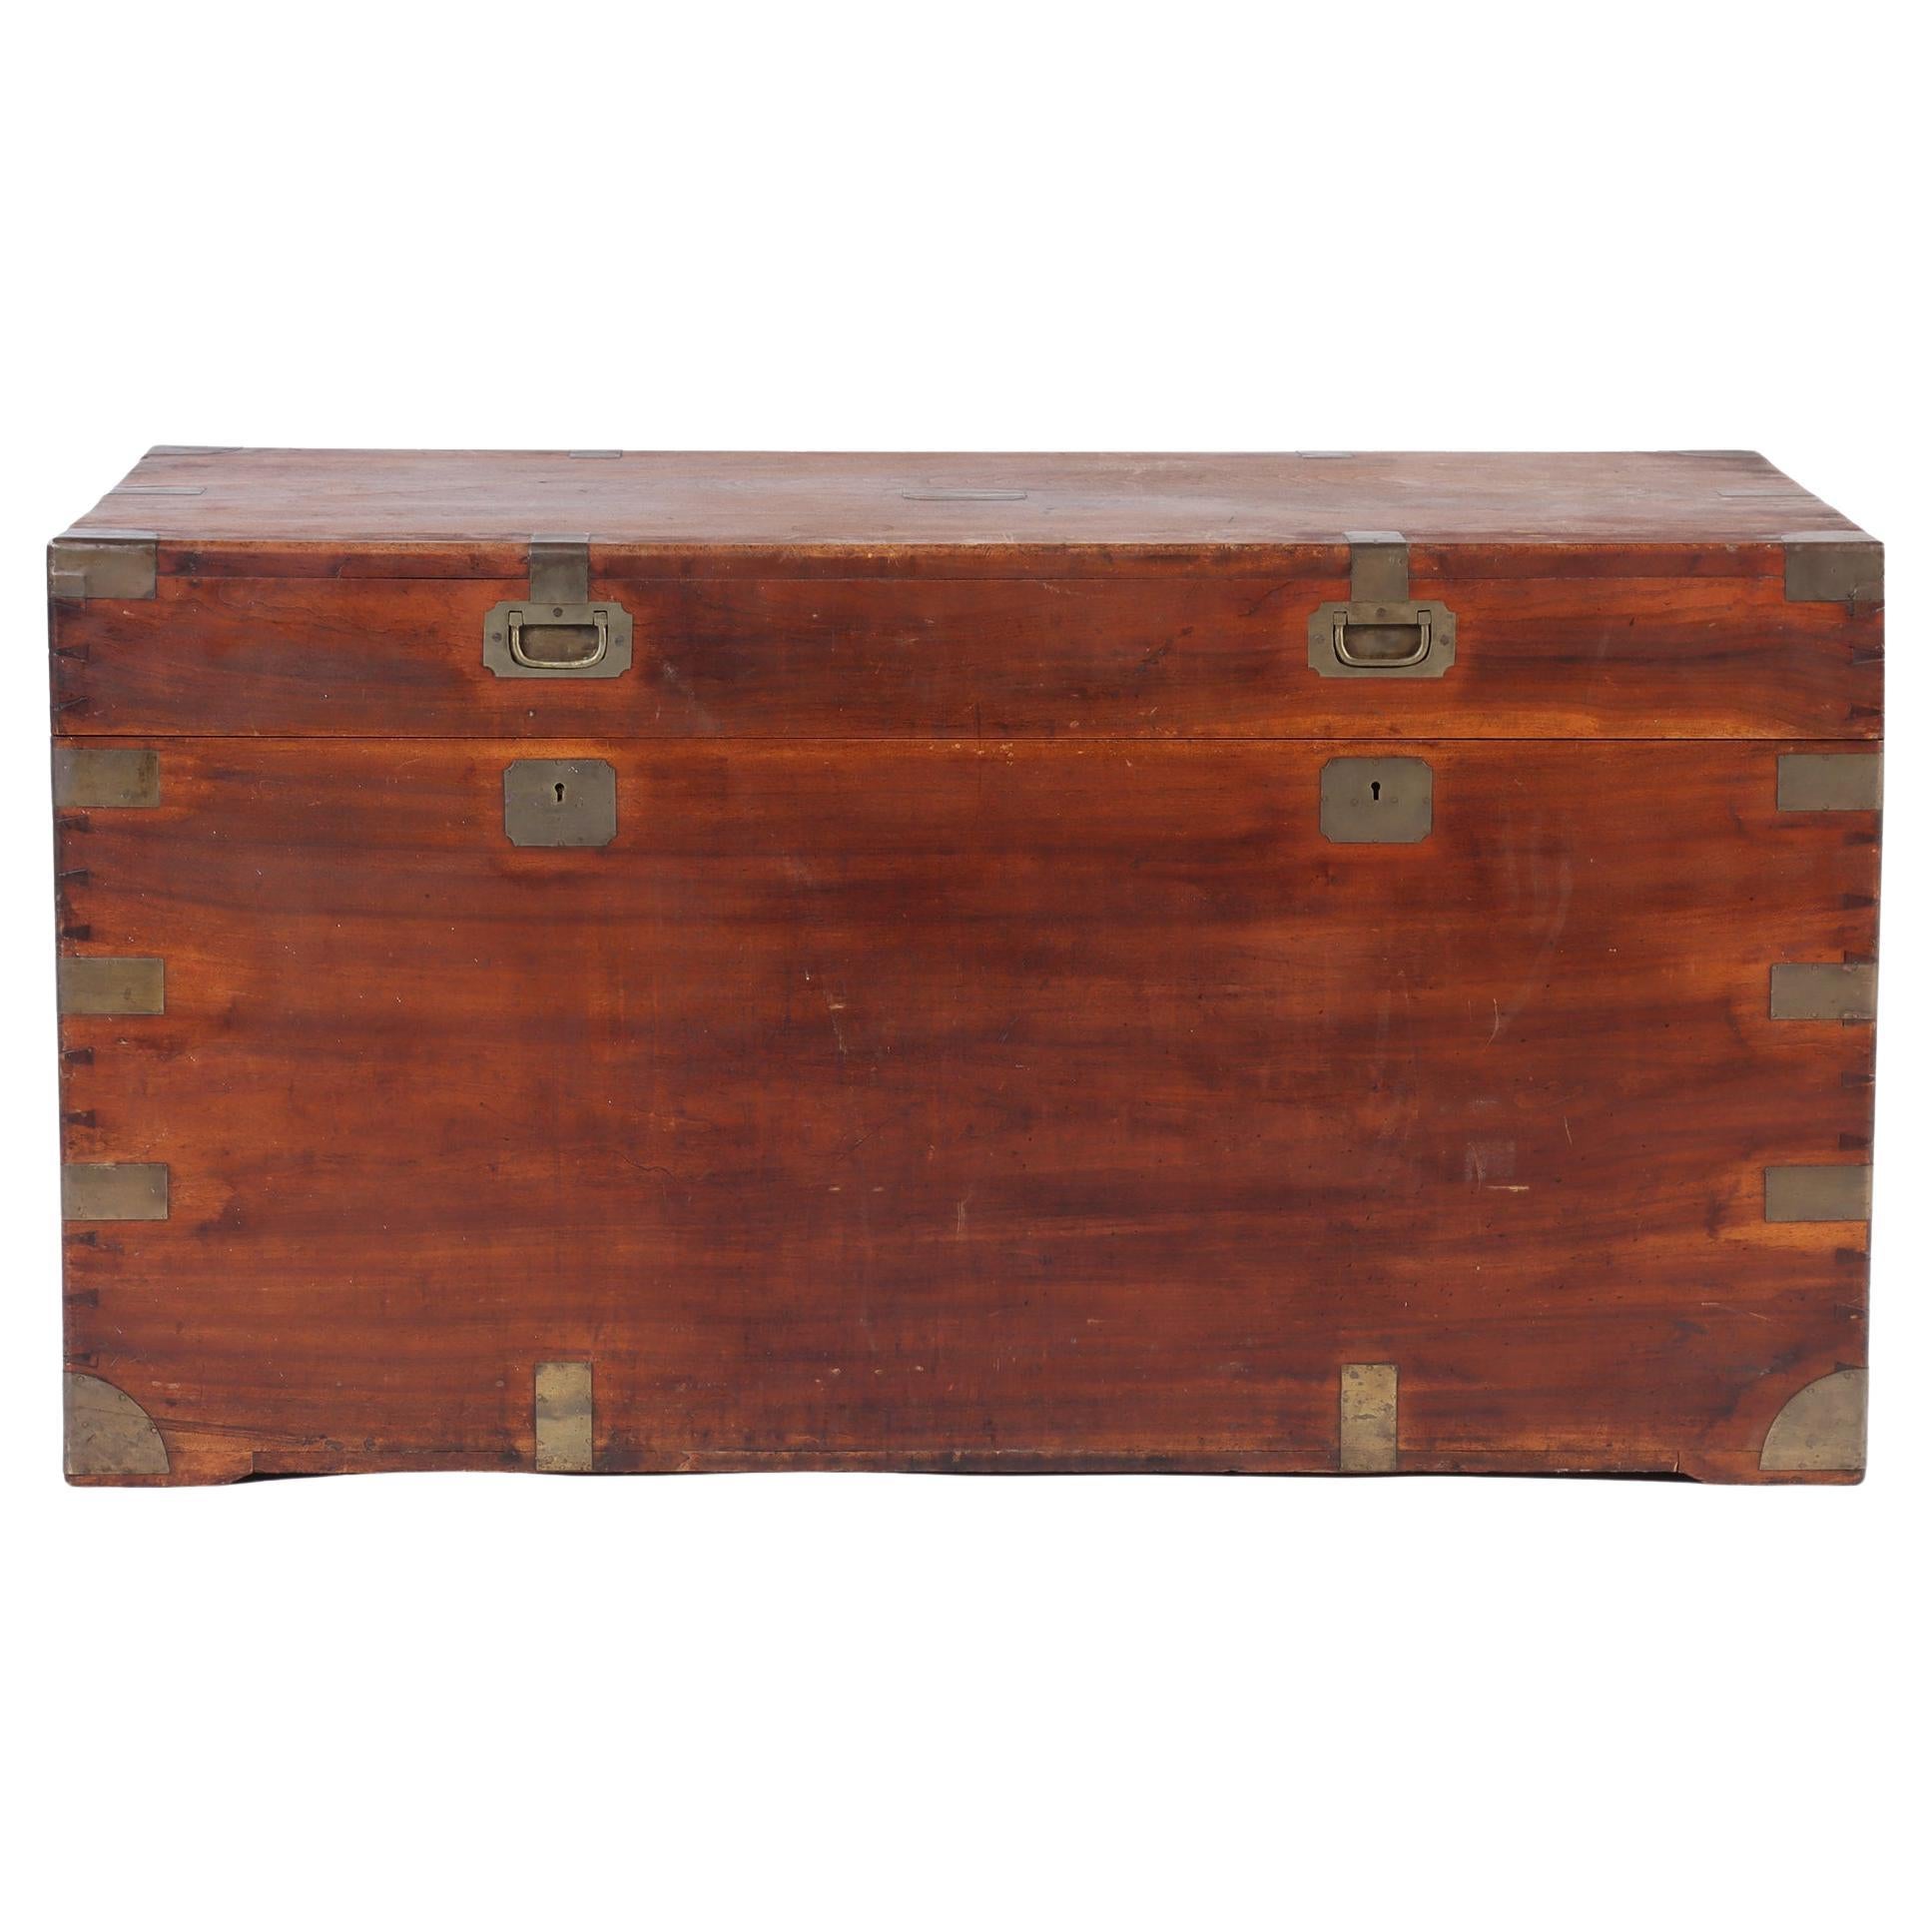 Large Marine Chest / Campaign Chest in Camphor Wood from the 19th Century